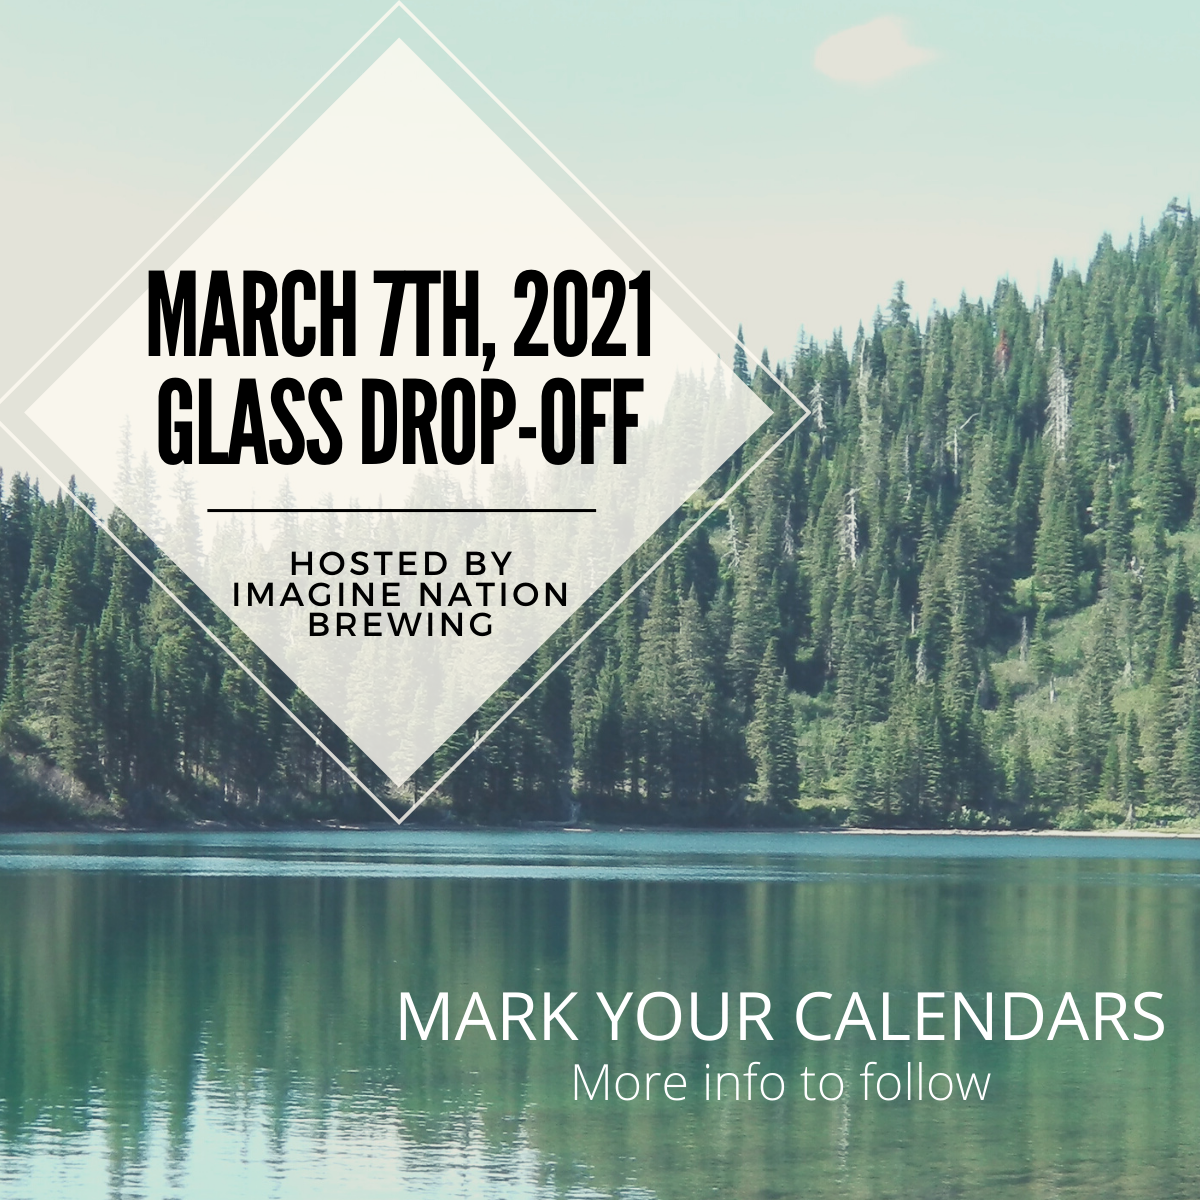 March 7th, 2021 Glass Drop-off